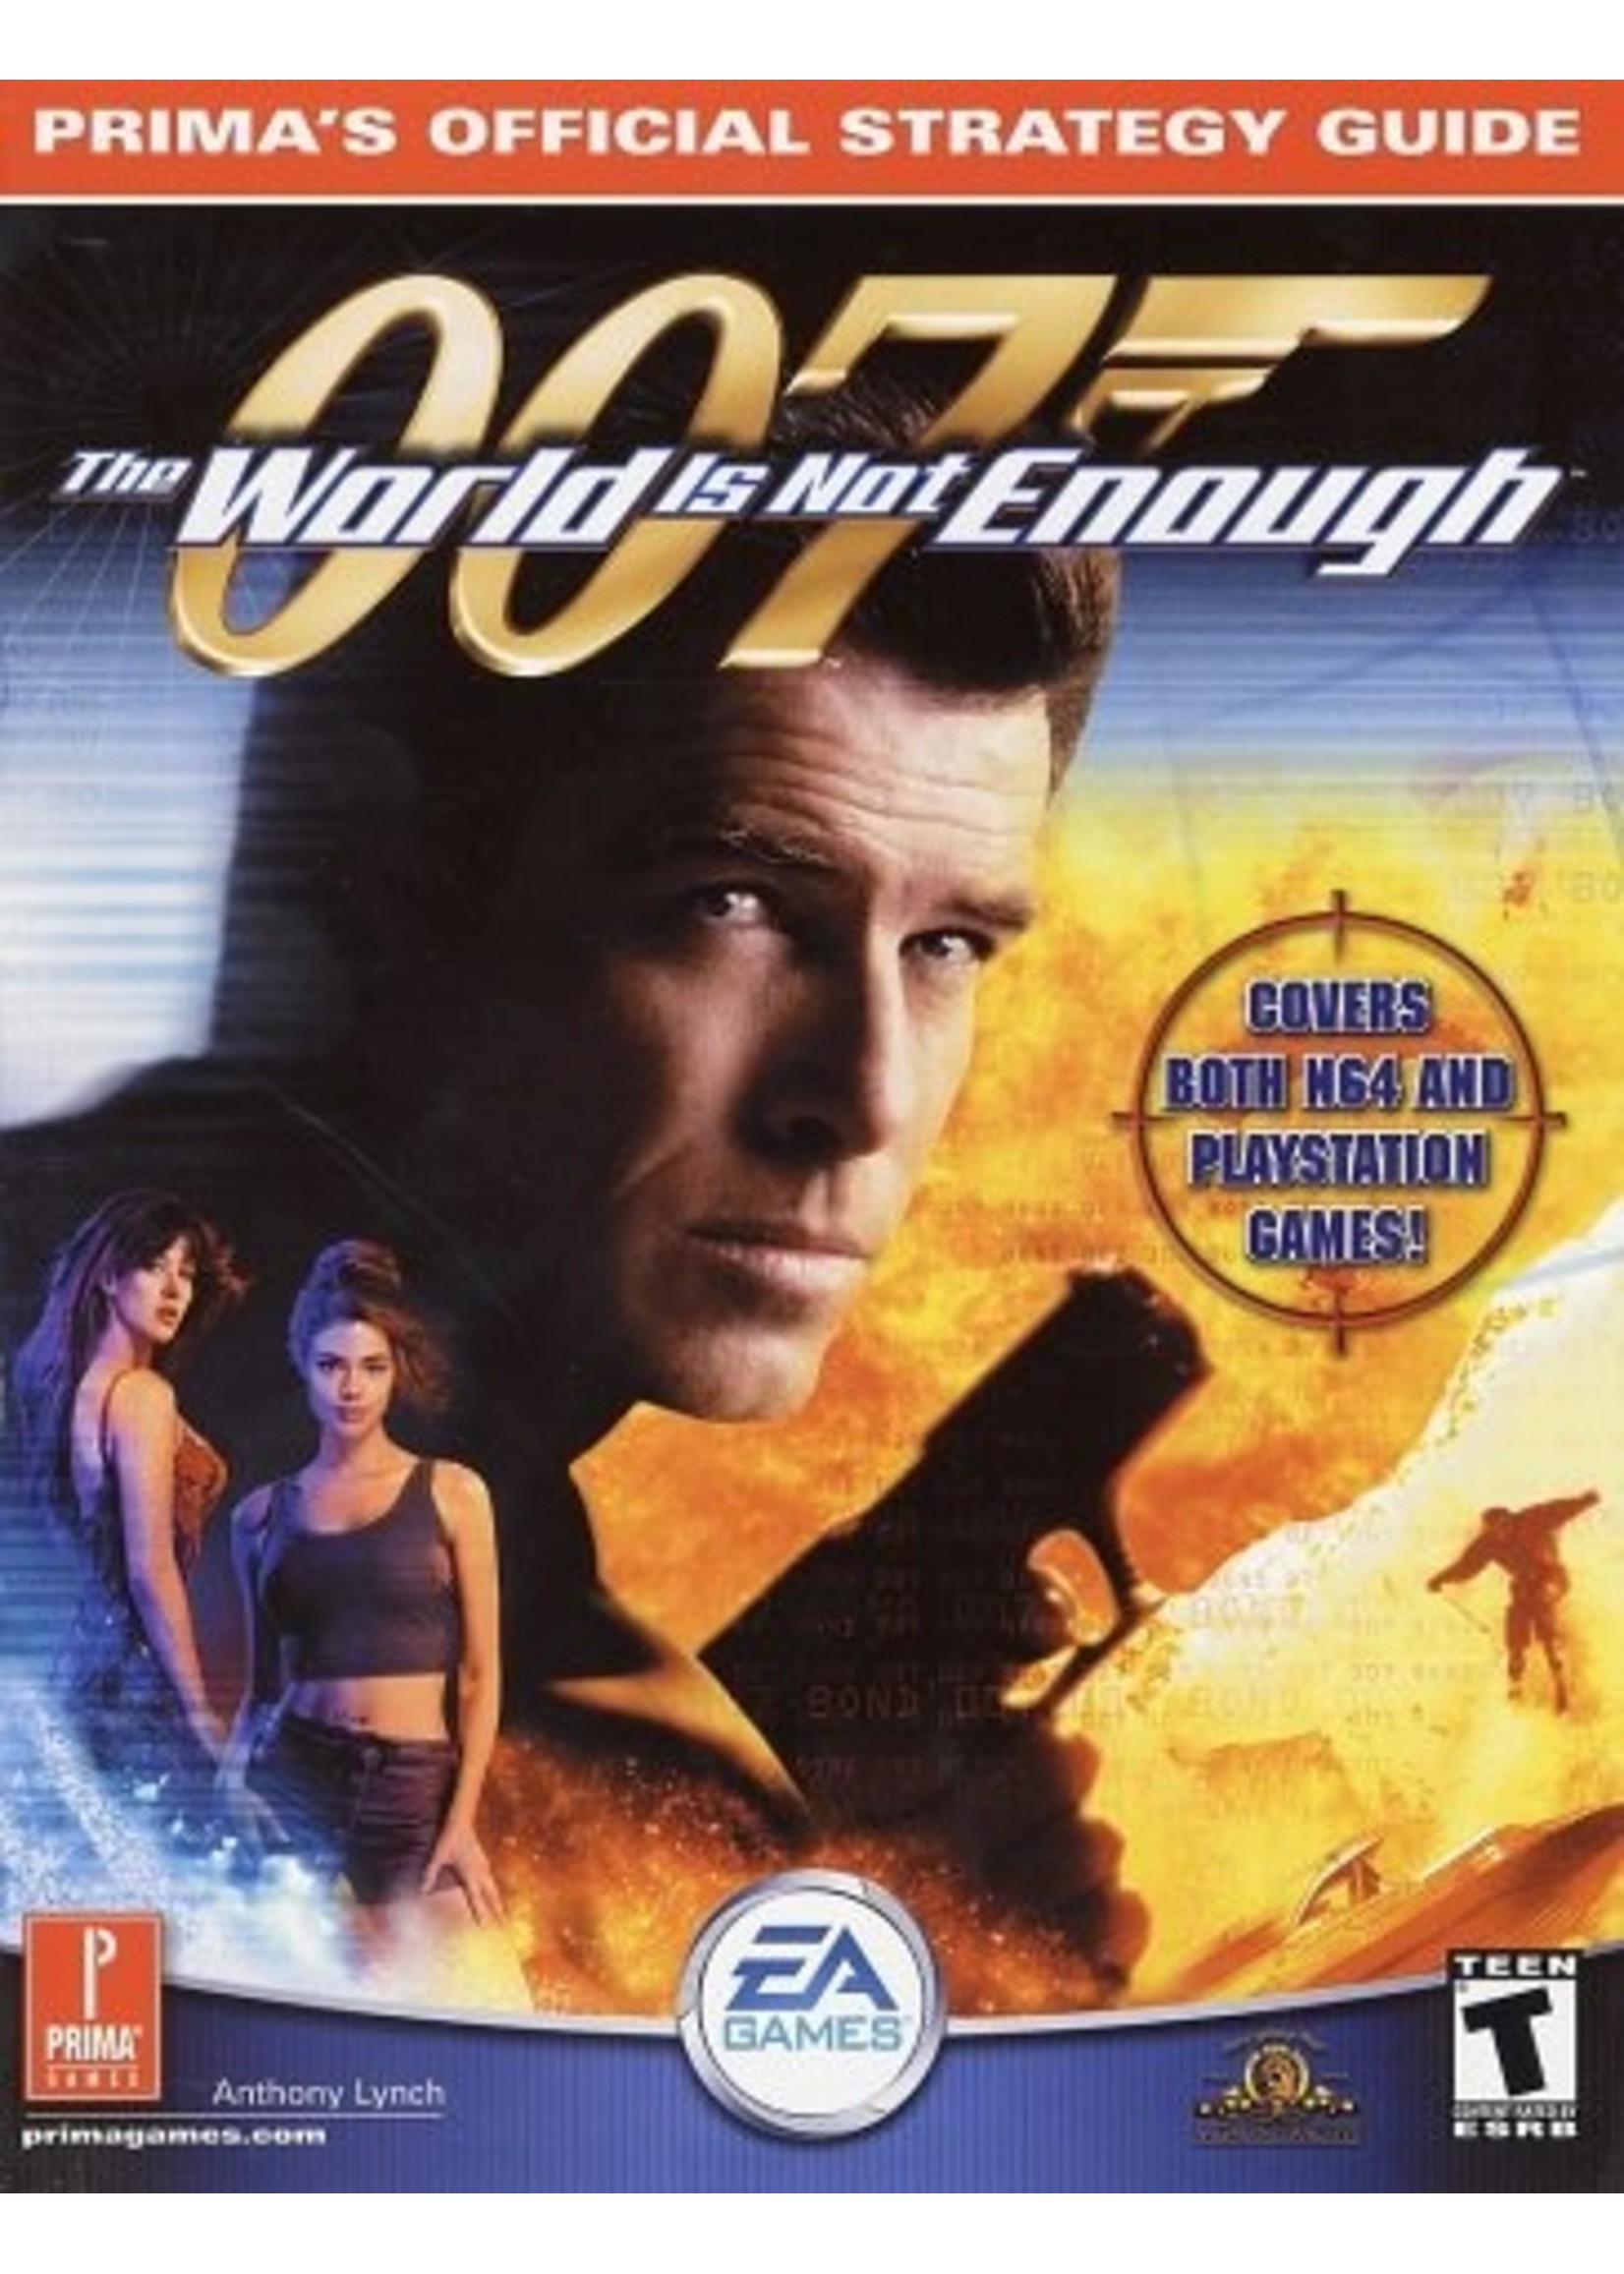 007 The World is Not Enough Guide